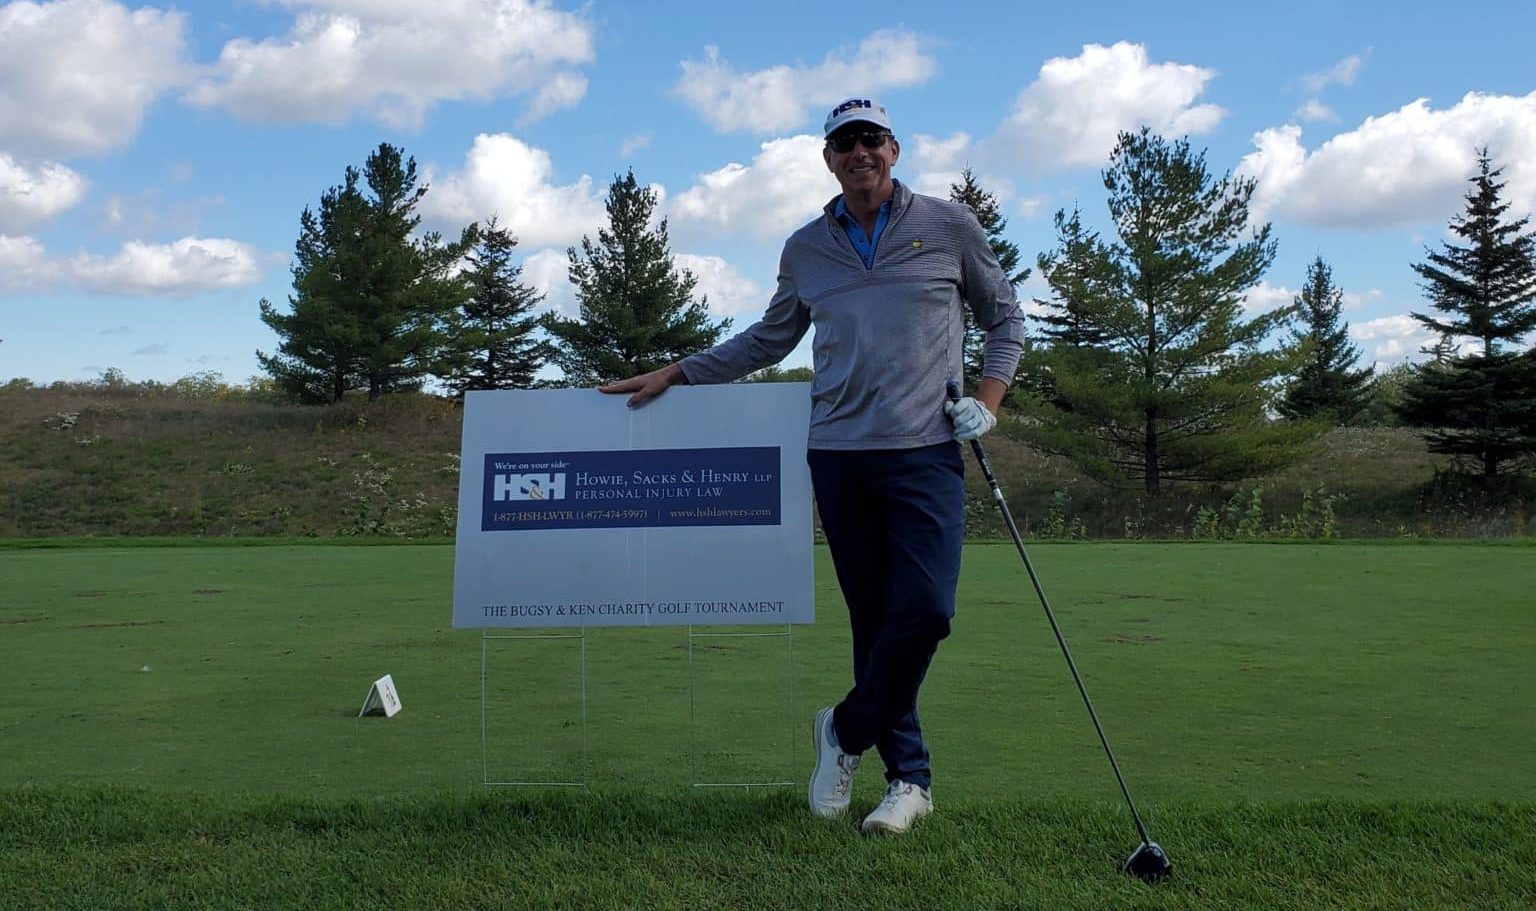 Howie, Sacks & Henry Supports Lawyers Feed the Hungry at Bugsy & Ken Charity Golf Tournament